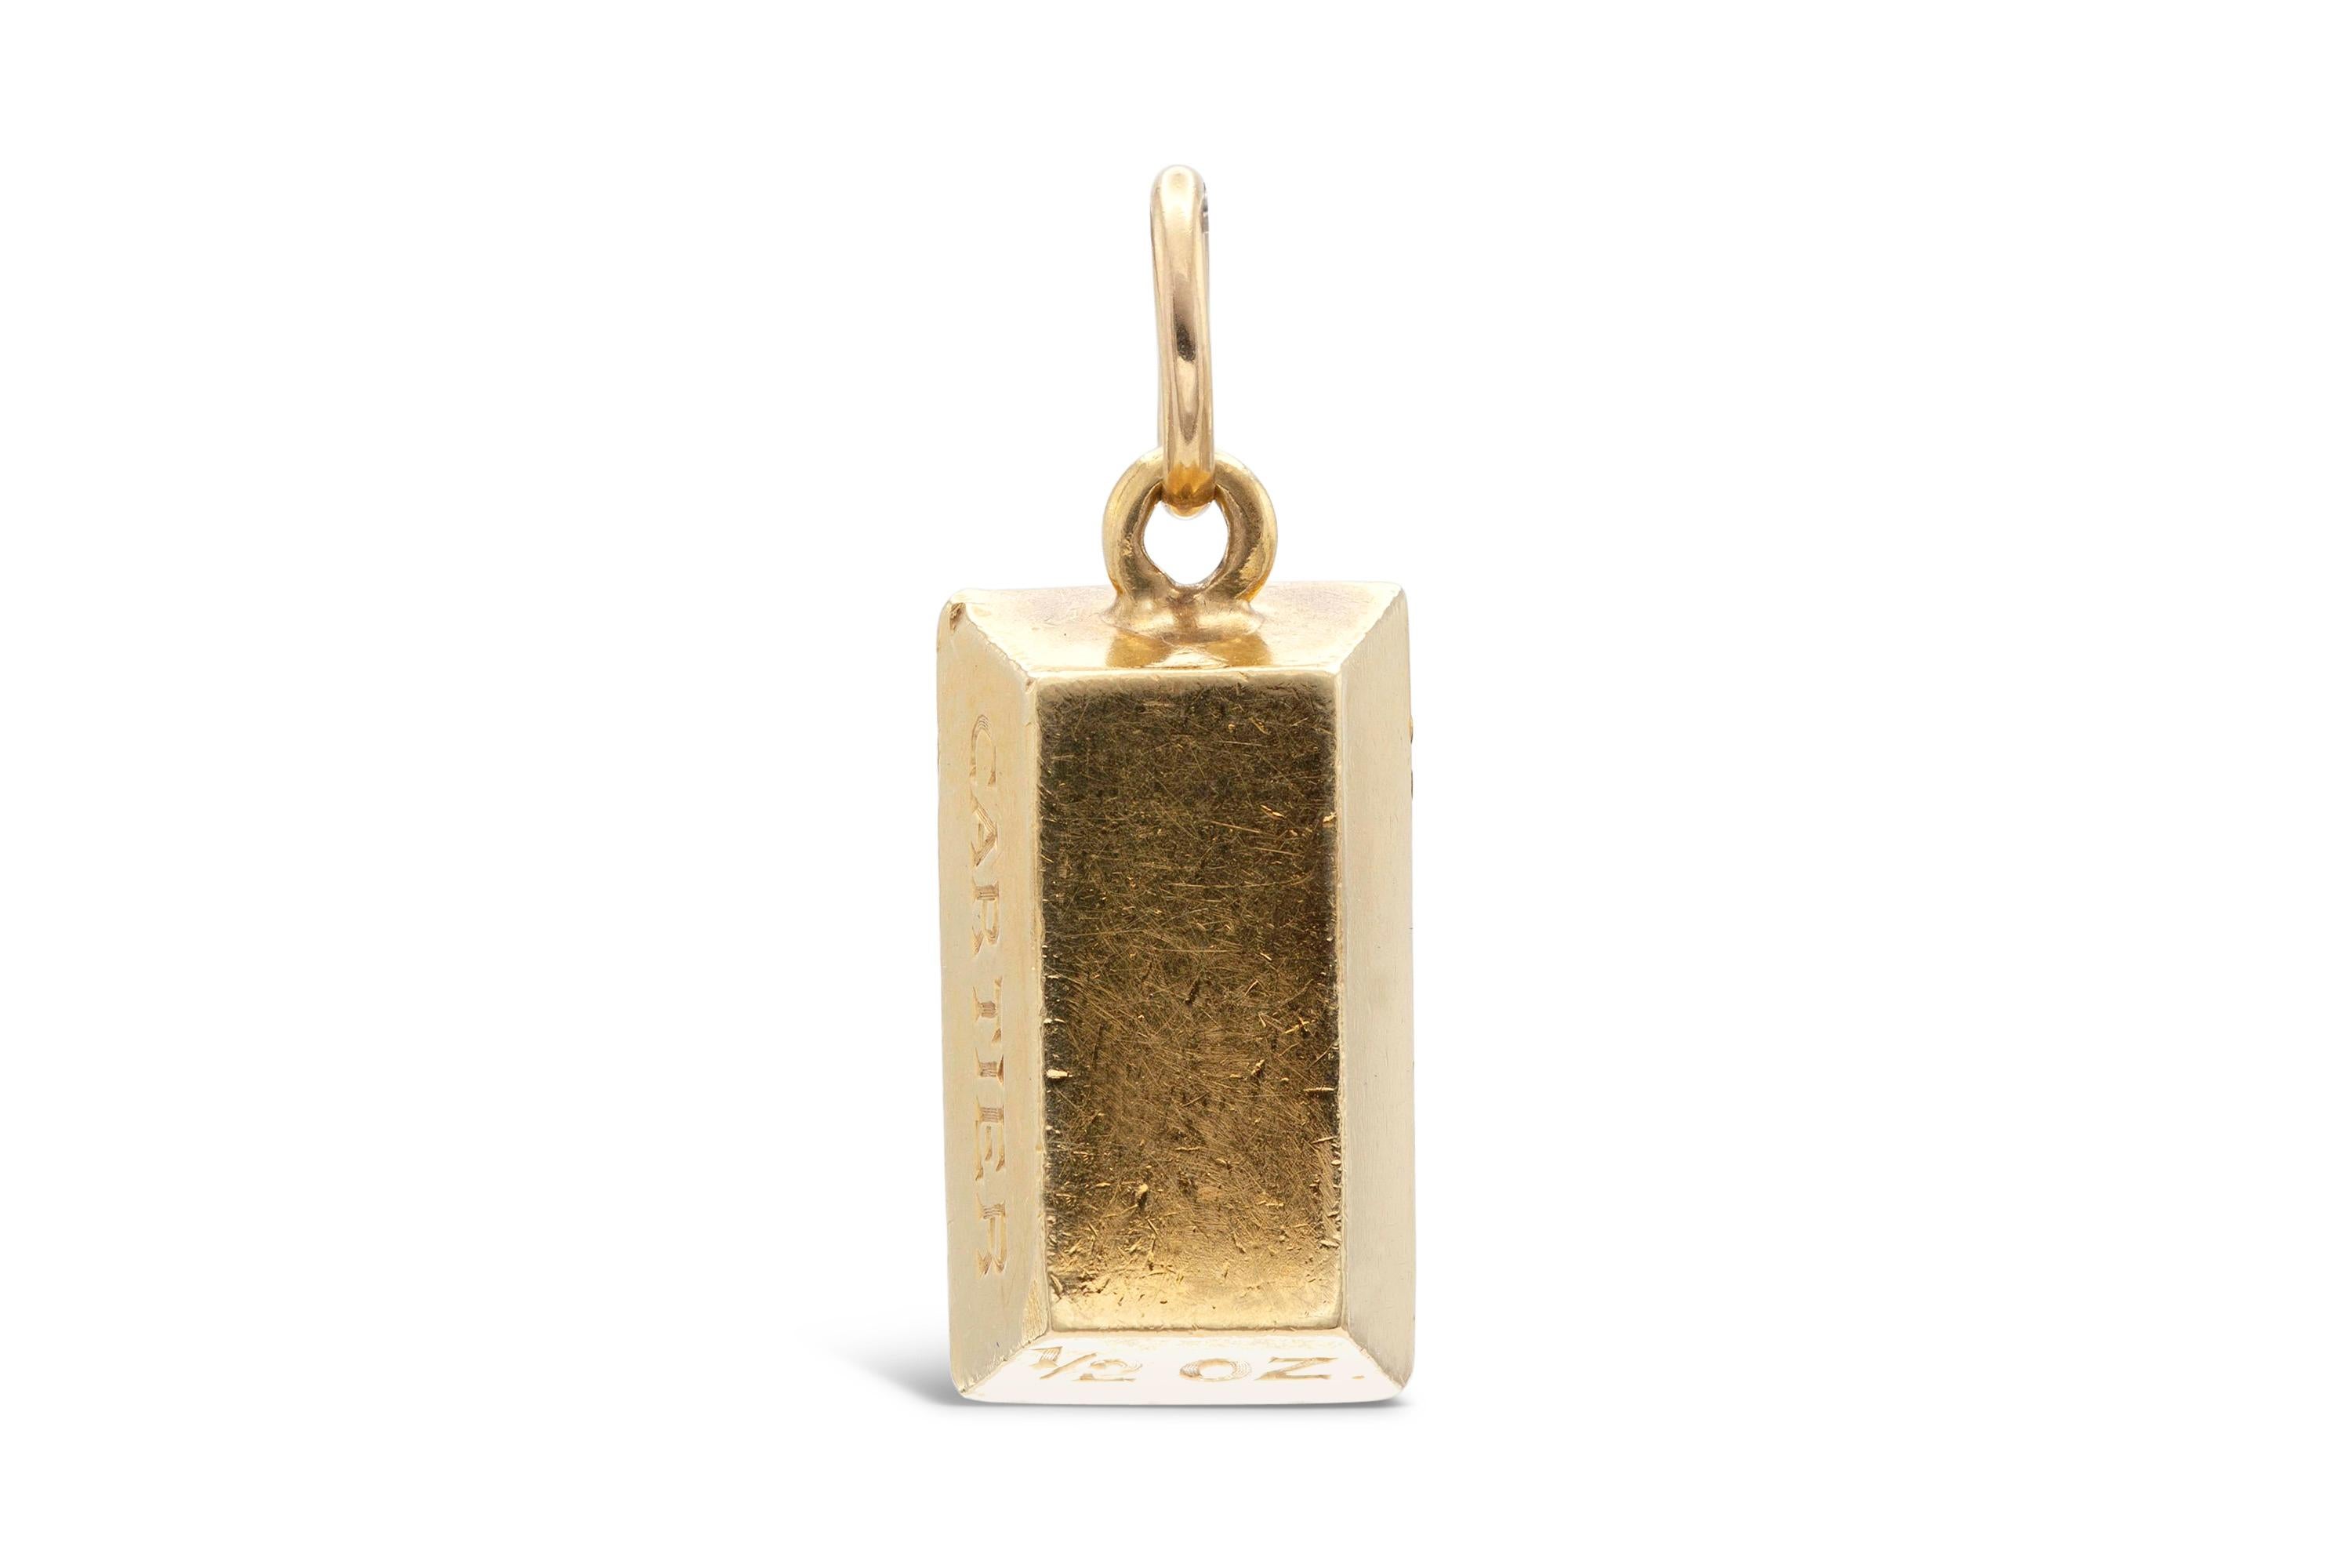 18K yellow gold bar weighing 1/2oz, wearable as a pendant. Signed Cartier.